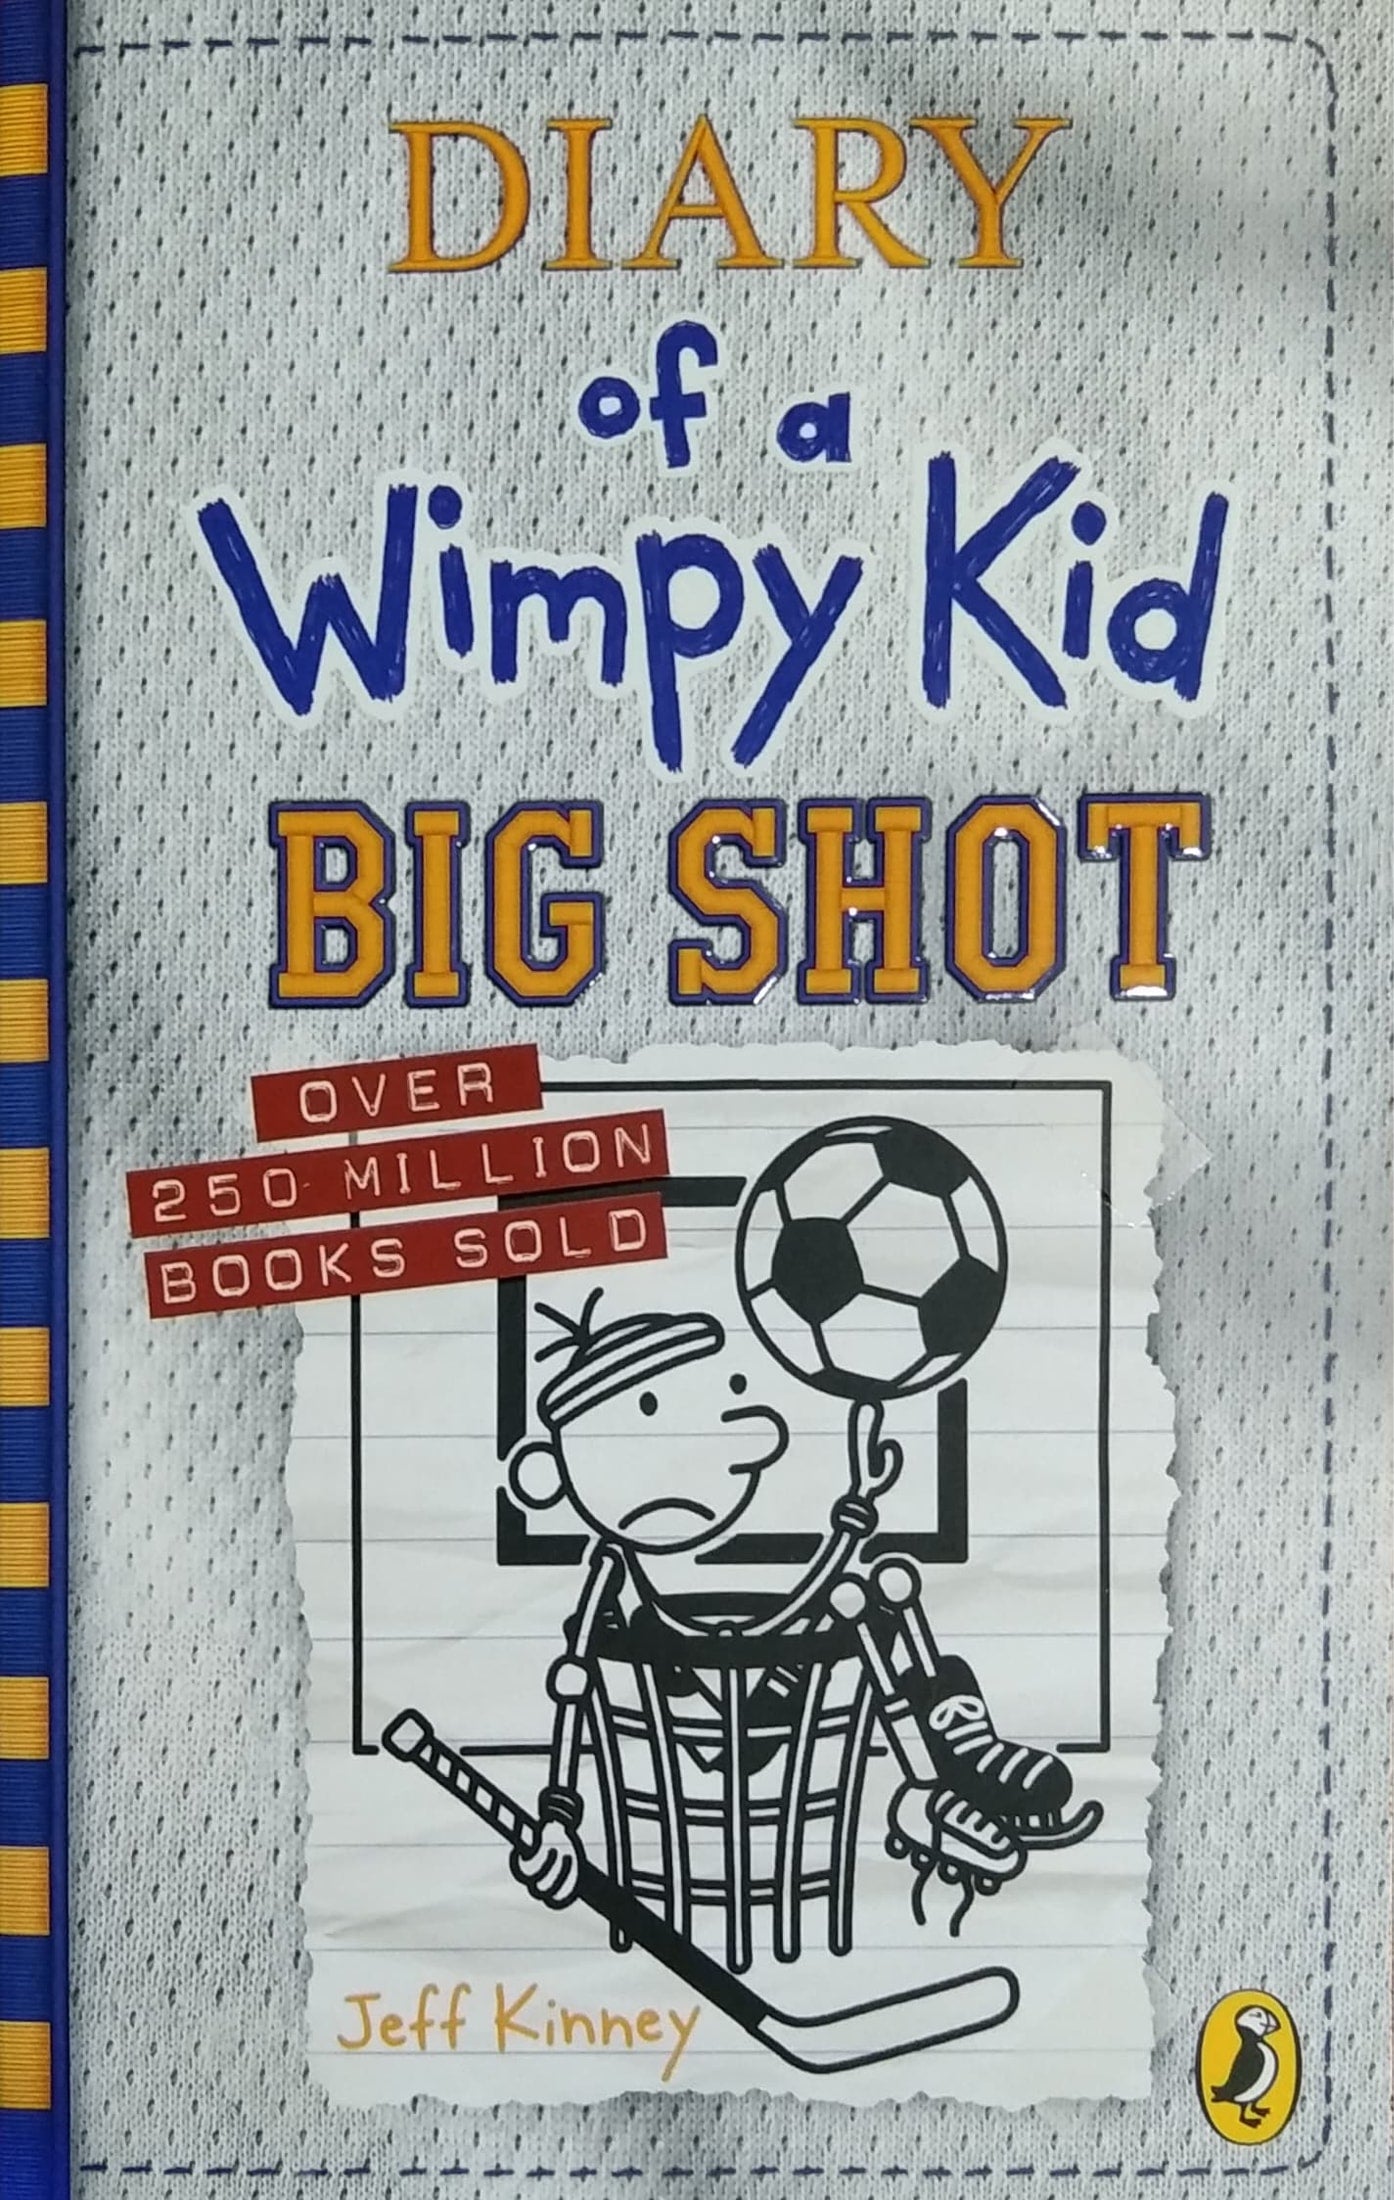 DIARY of a Wimpy Kid BIG SHOT